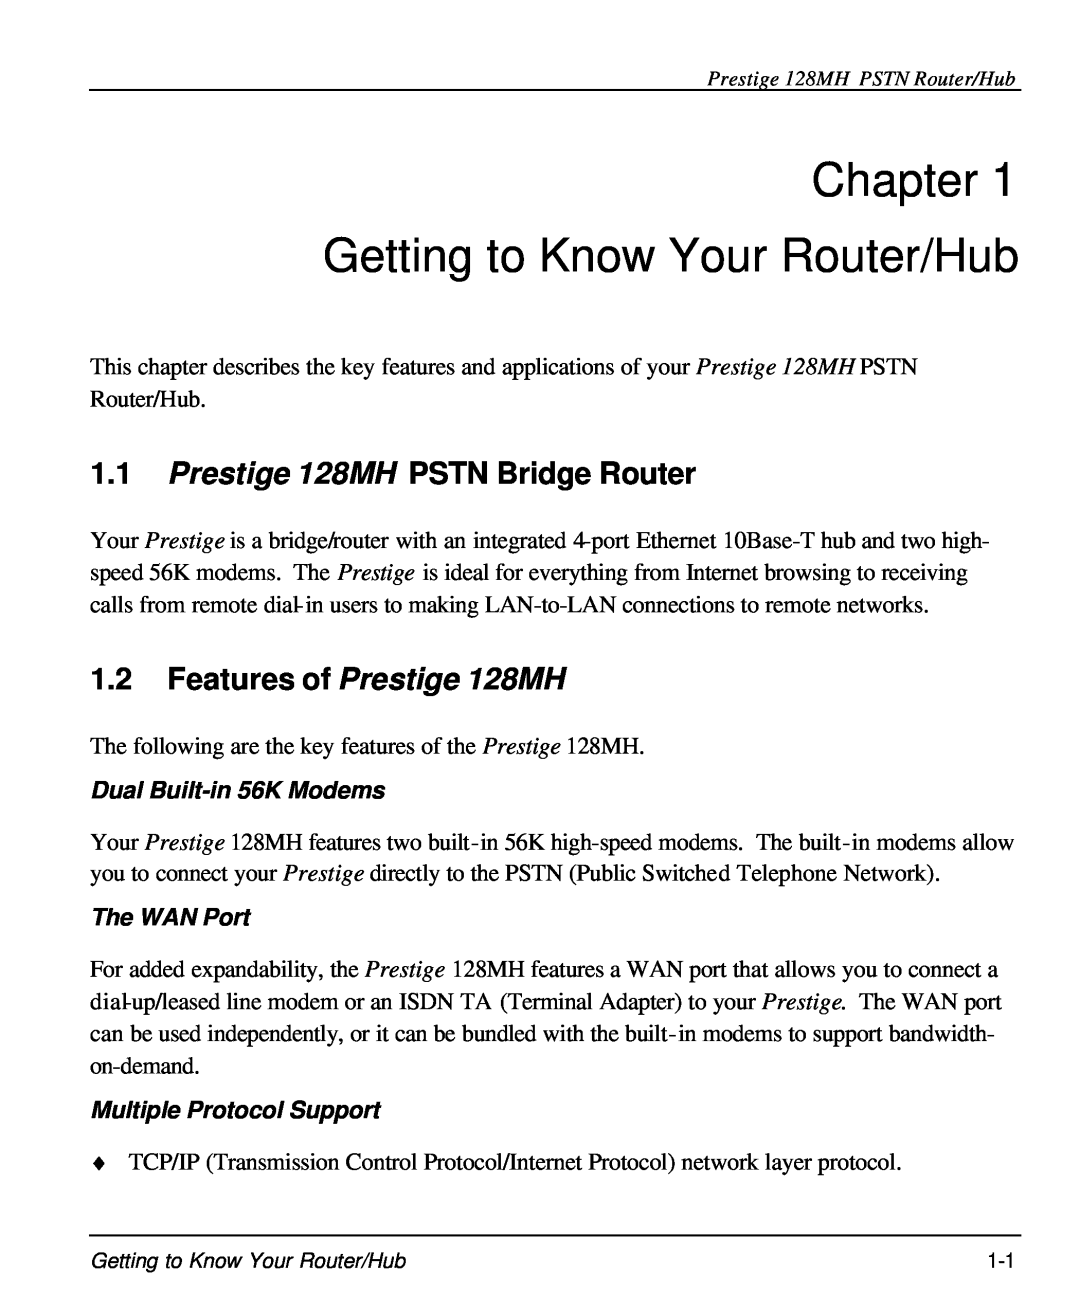 ZyXEL Communications Chapter Getting to Know Your Router/Hub, Prestige 128MH PSTN Bridge Router, The WAN Port 